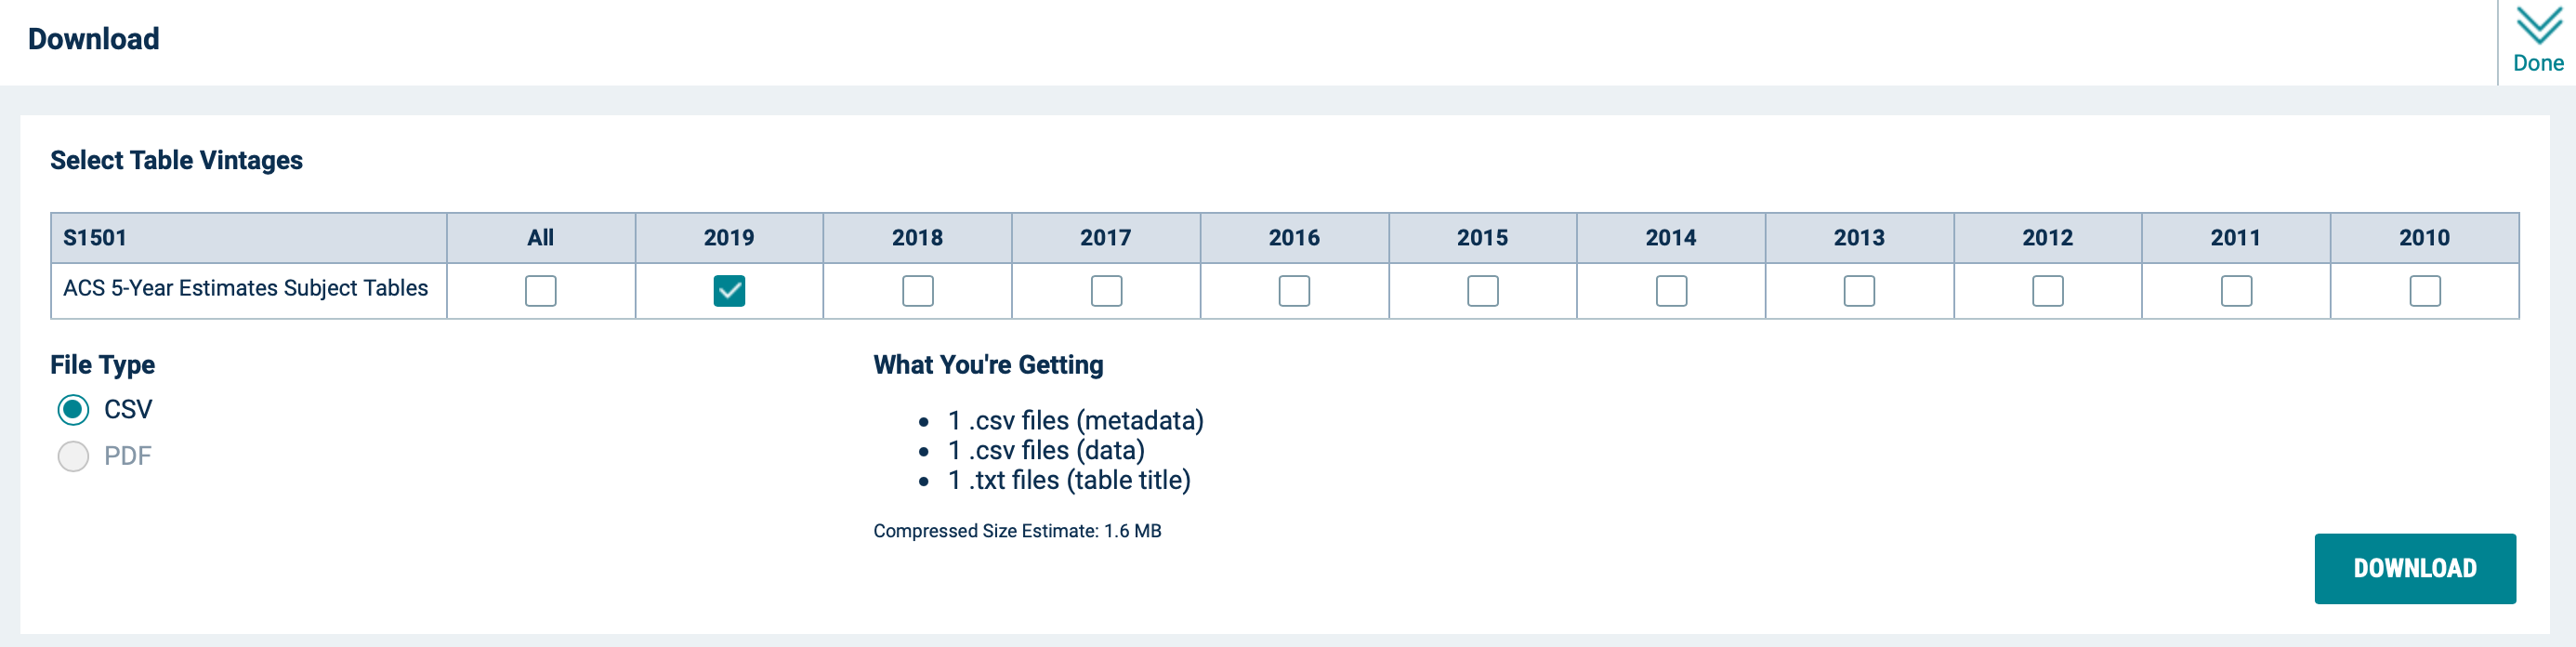 Screenshot of the download menu in the Explore Census Data portal. Users have to option to select additional years before downloading.